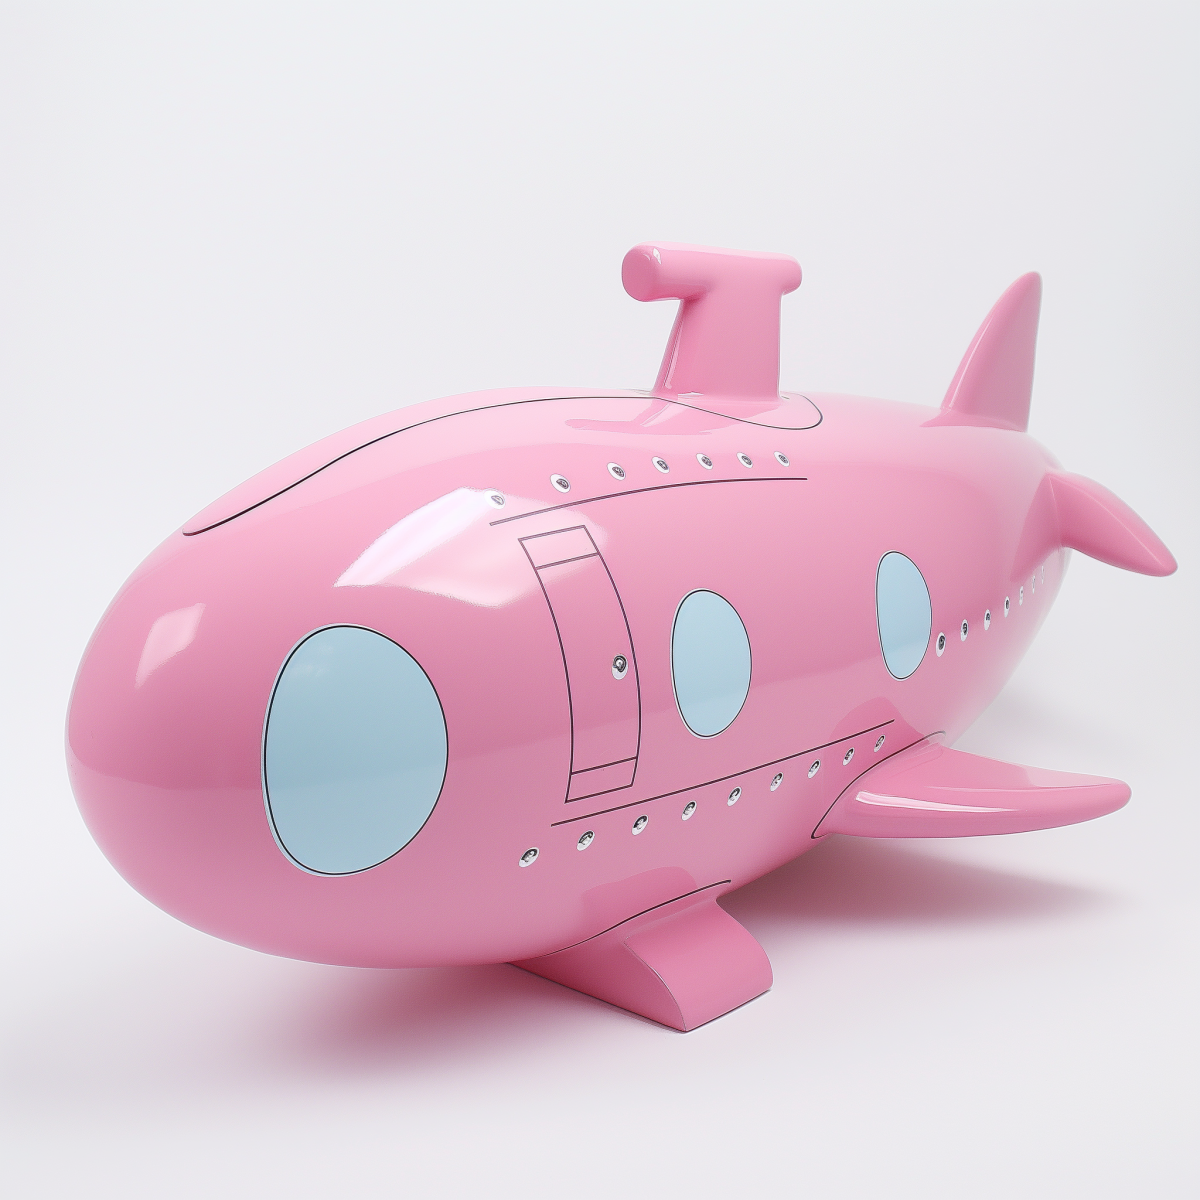 A submarine piggybank with one or two design issues.